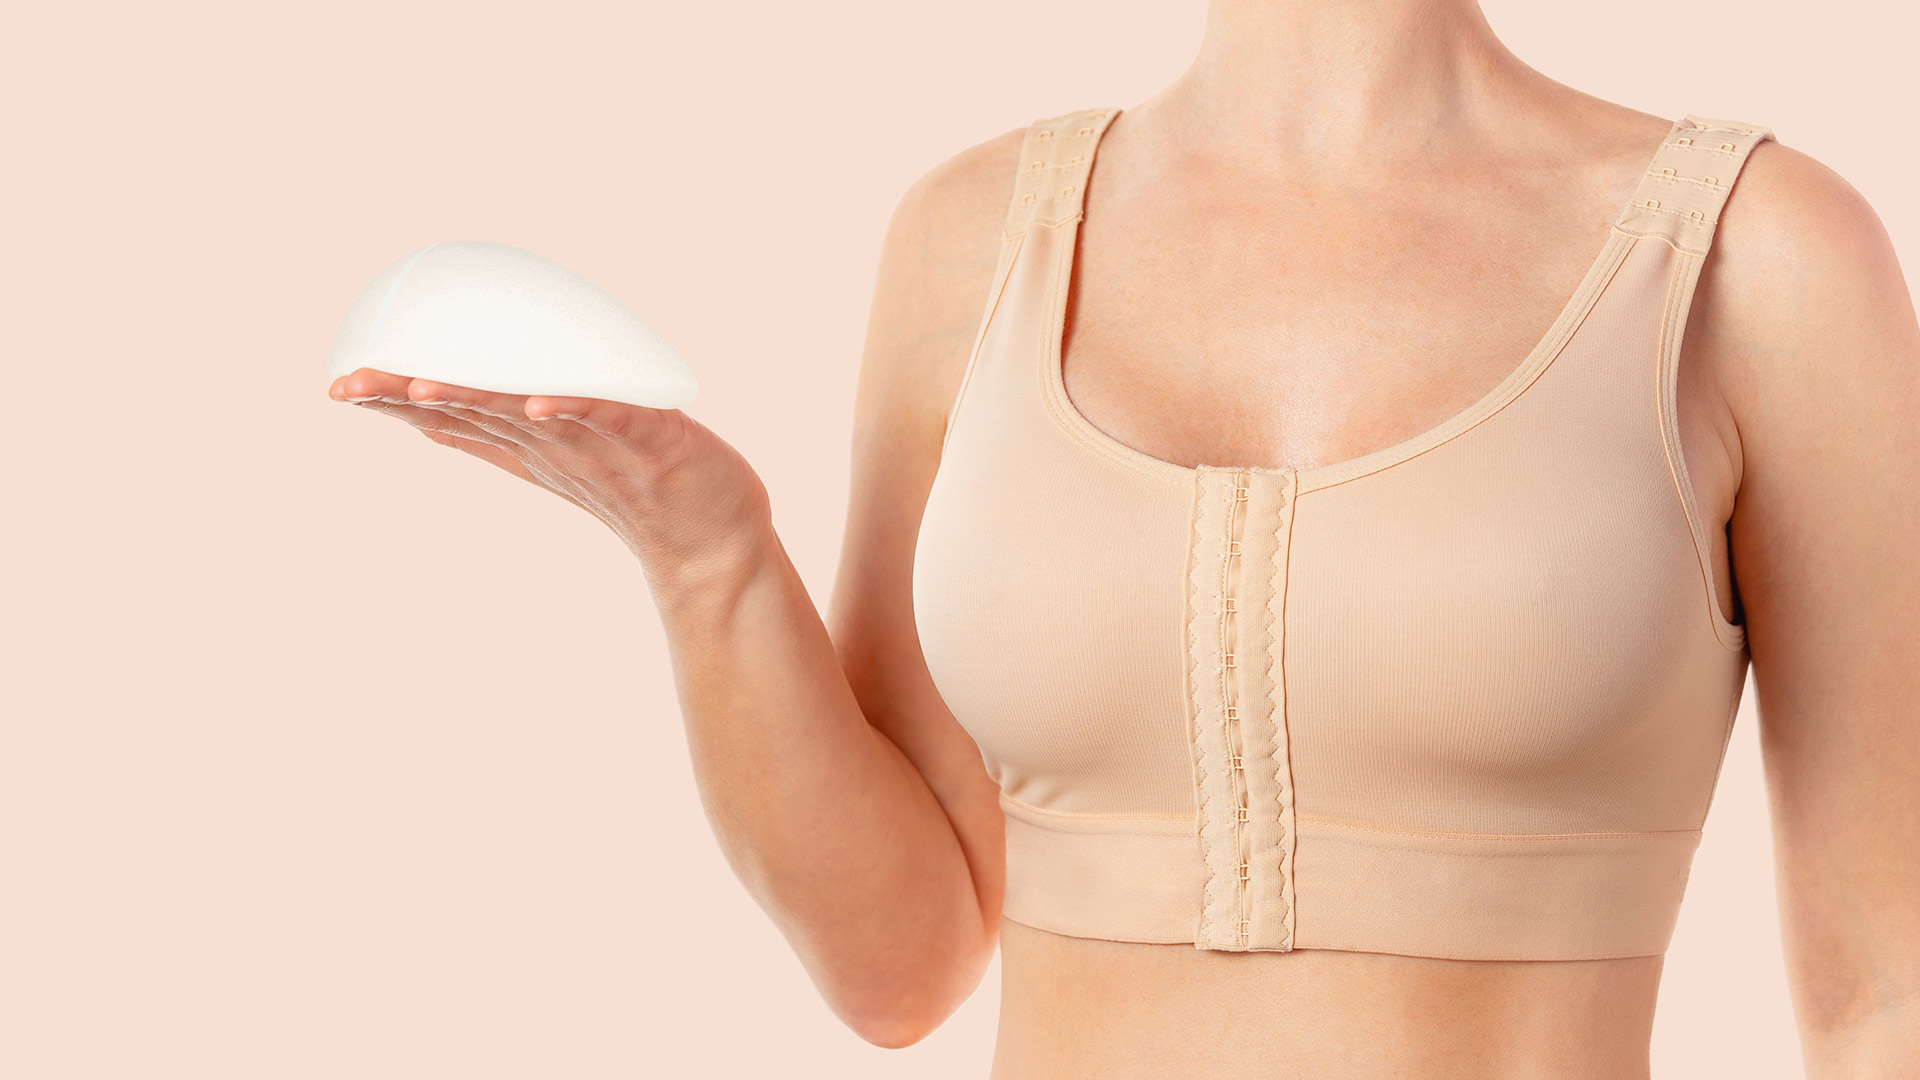 Why wear compression garments after plastic surgery? - Sasson